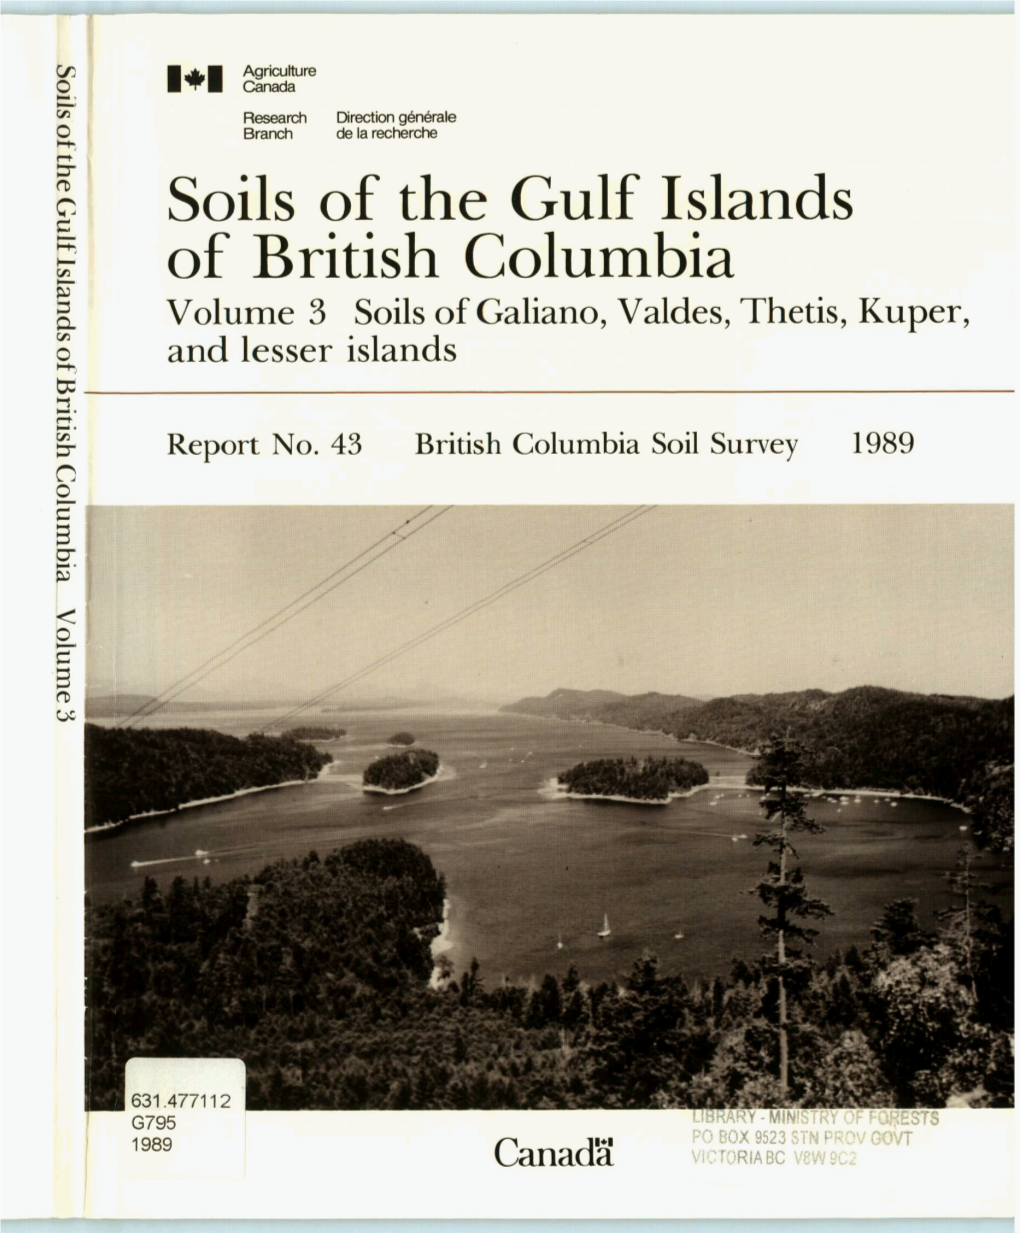 Soils of the Gulf Islands of British Columbia Volume 3 Soils of Galiano, Valdes, Thetis, Kuper, and Lesser Islands